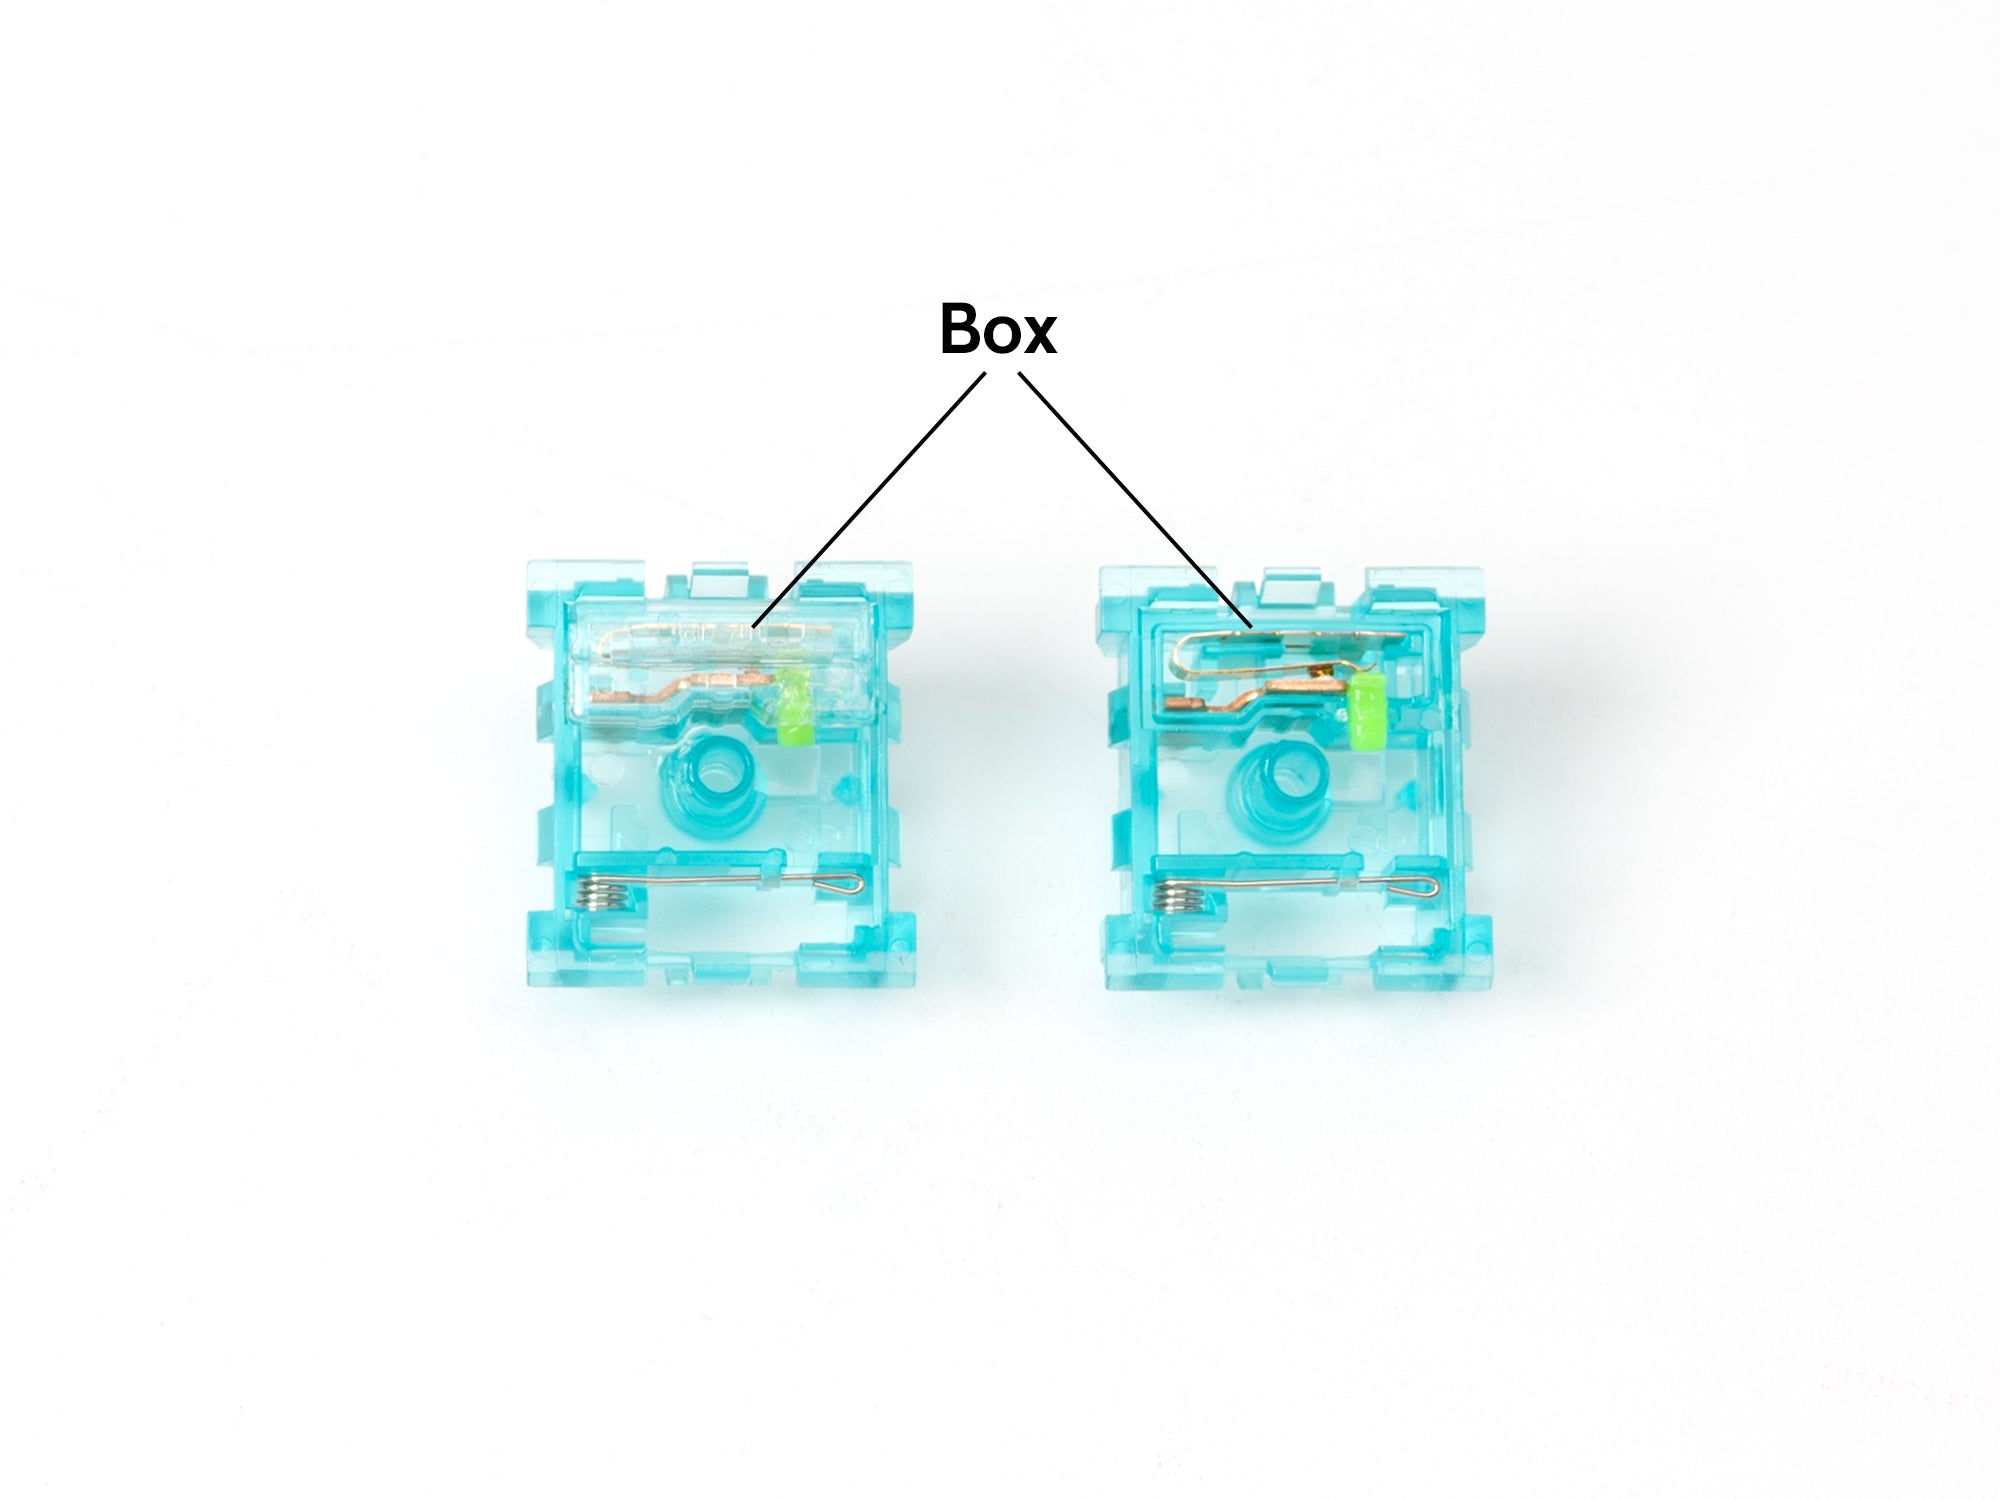 Kailh Box Summer Clicky Switch “Box” Design